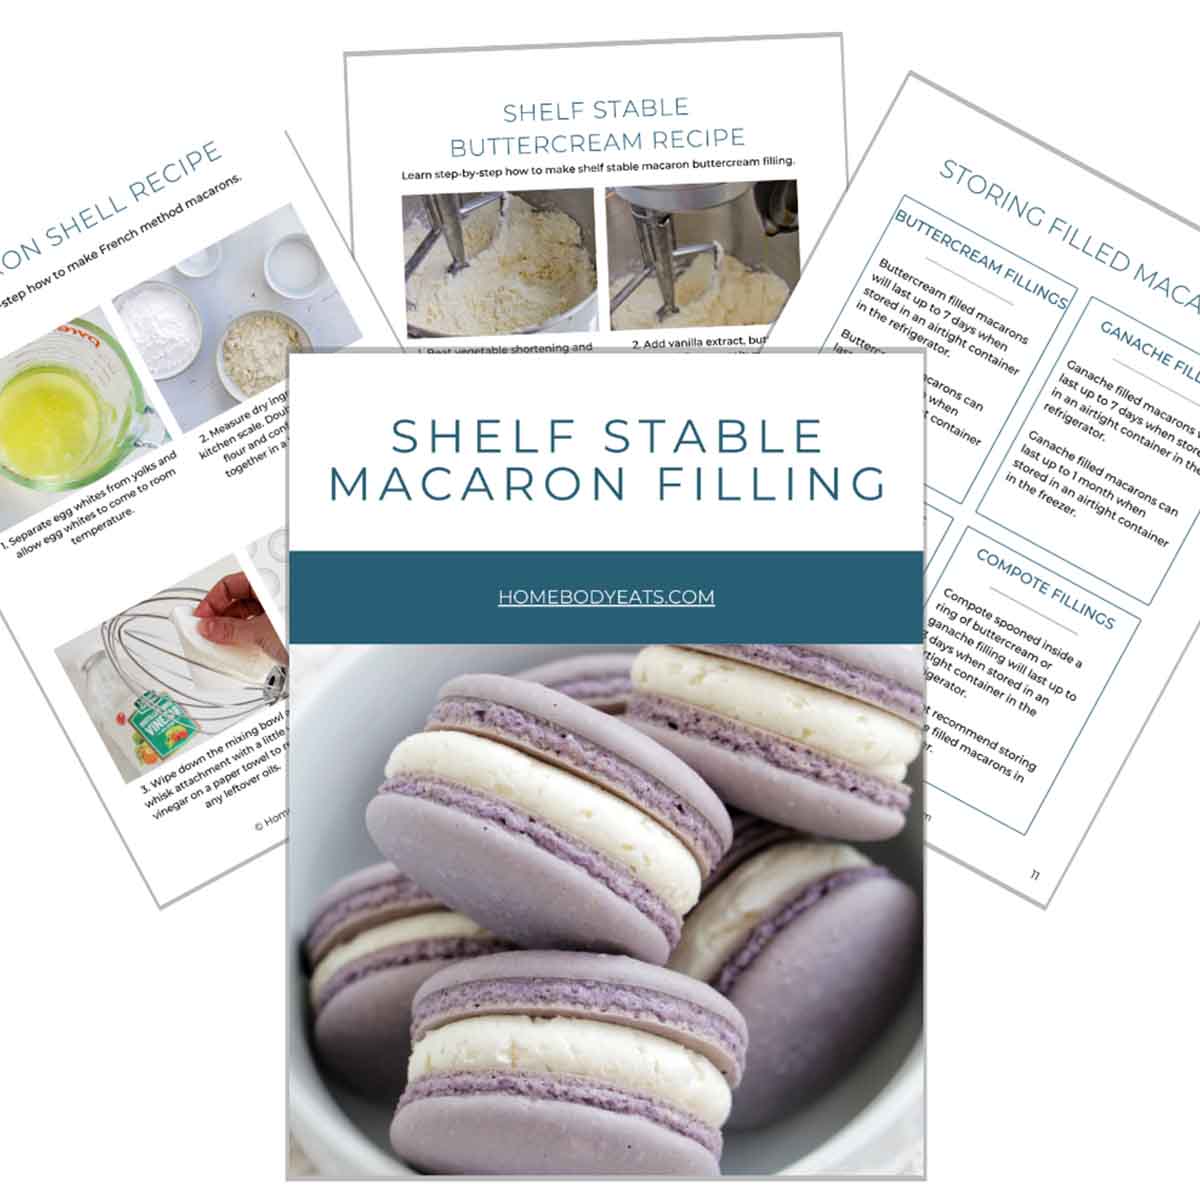 The Shelf Stable Macaron ebook cover with various types macarons.